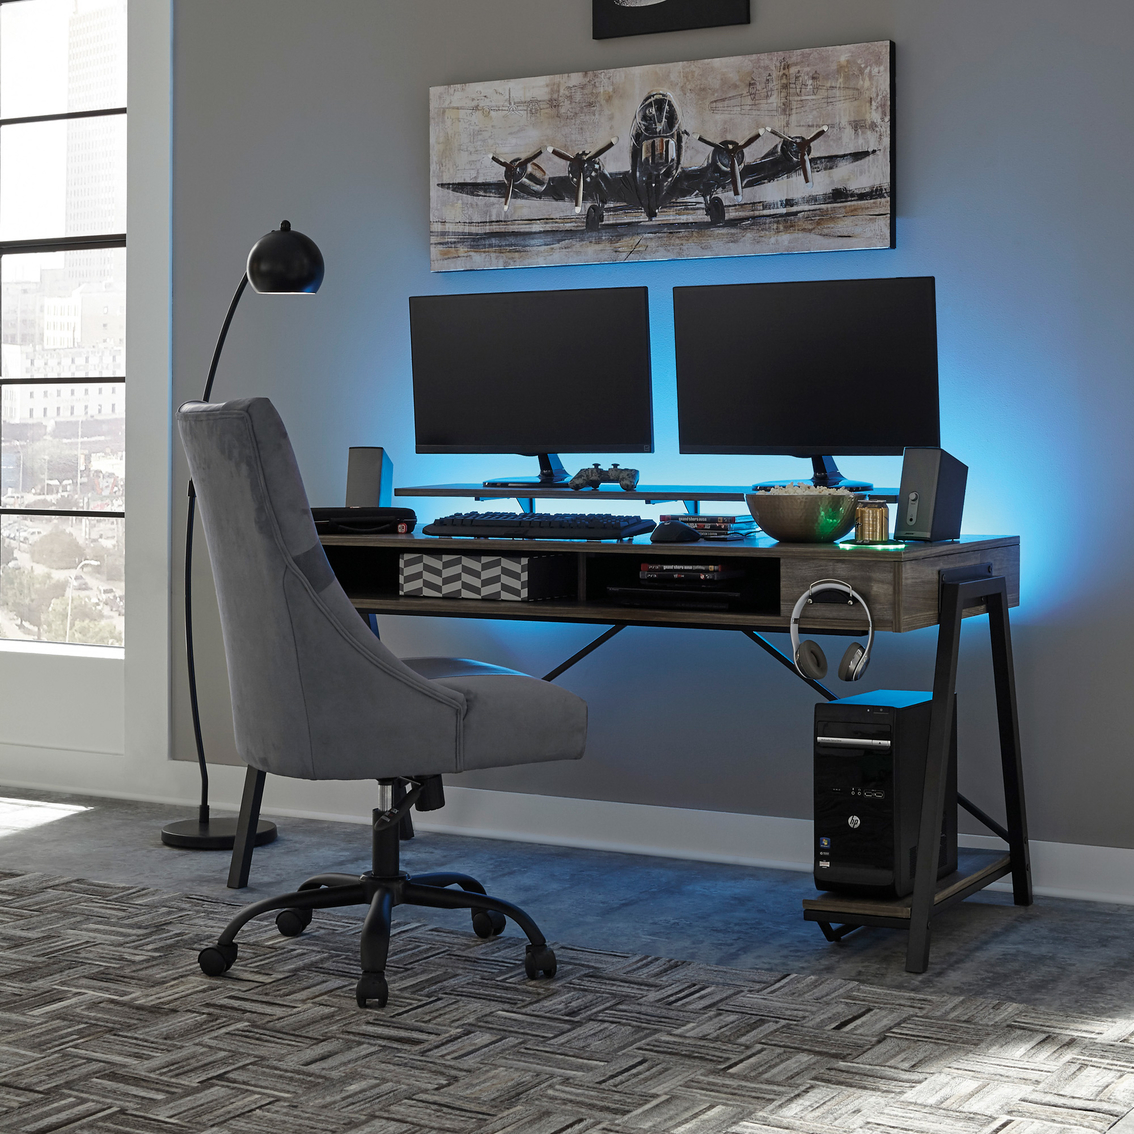 Signature Design by Ashley Barolli Gaming Desk with Monitor Stand - Image 6 of 8